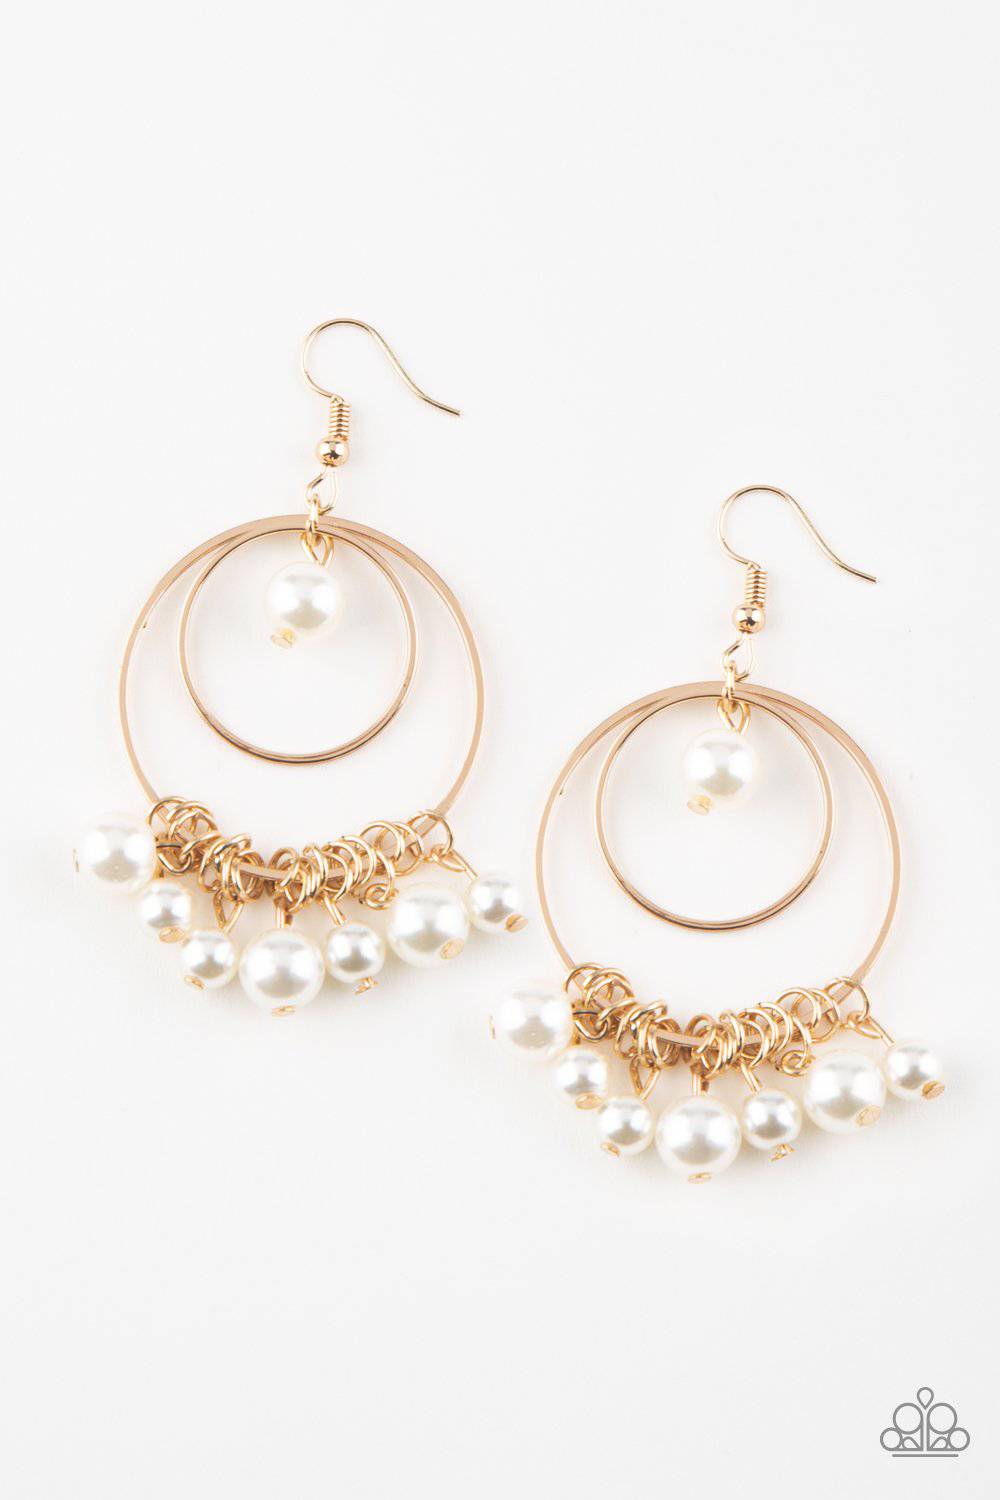 New York Attraction - Pearl & Gold Earrings - Paparazzi Accessories - GlaMarous Titi Jewels